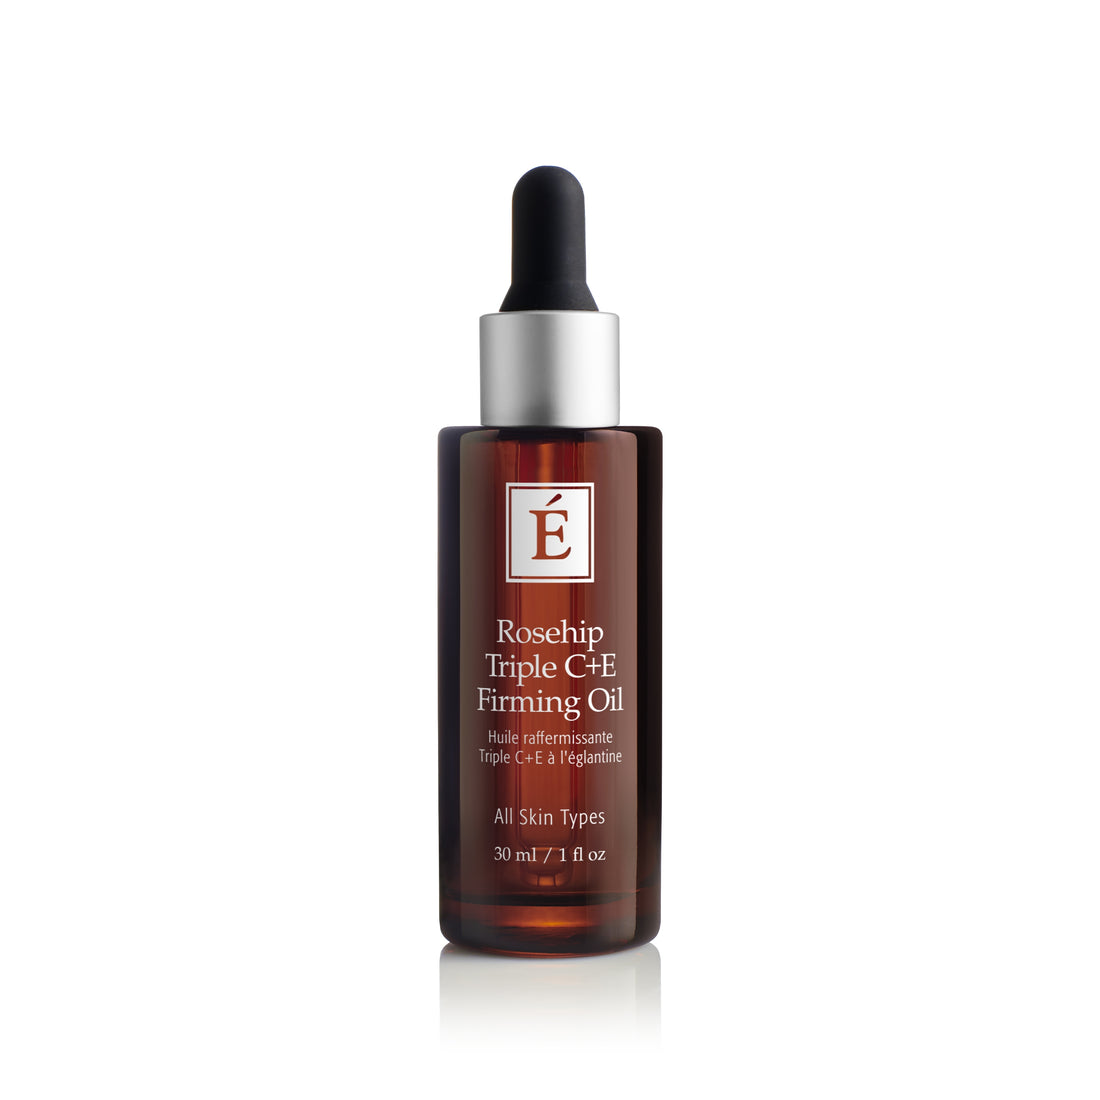 Rosehip Triple C+E Firming Oil | Deeply hydrating facial oil